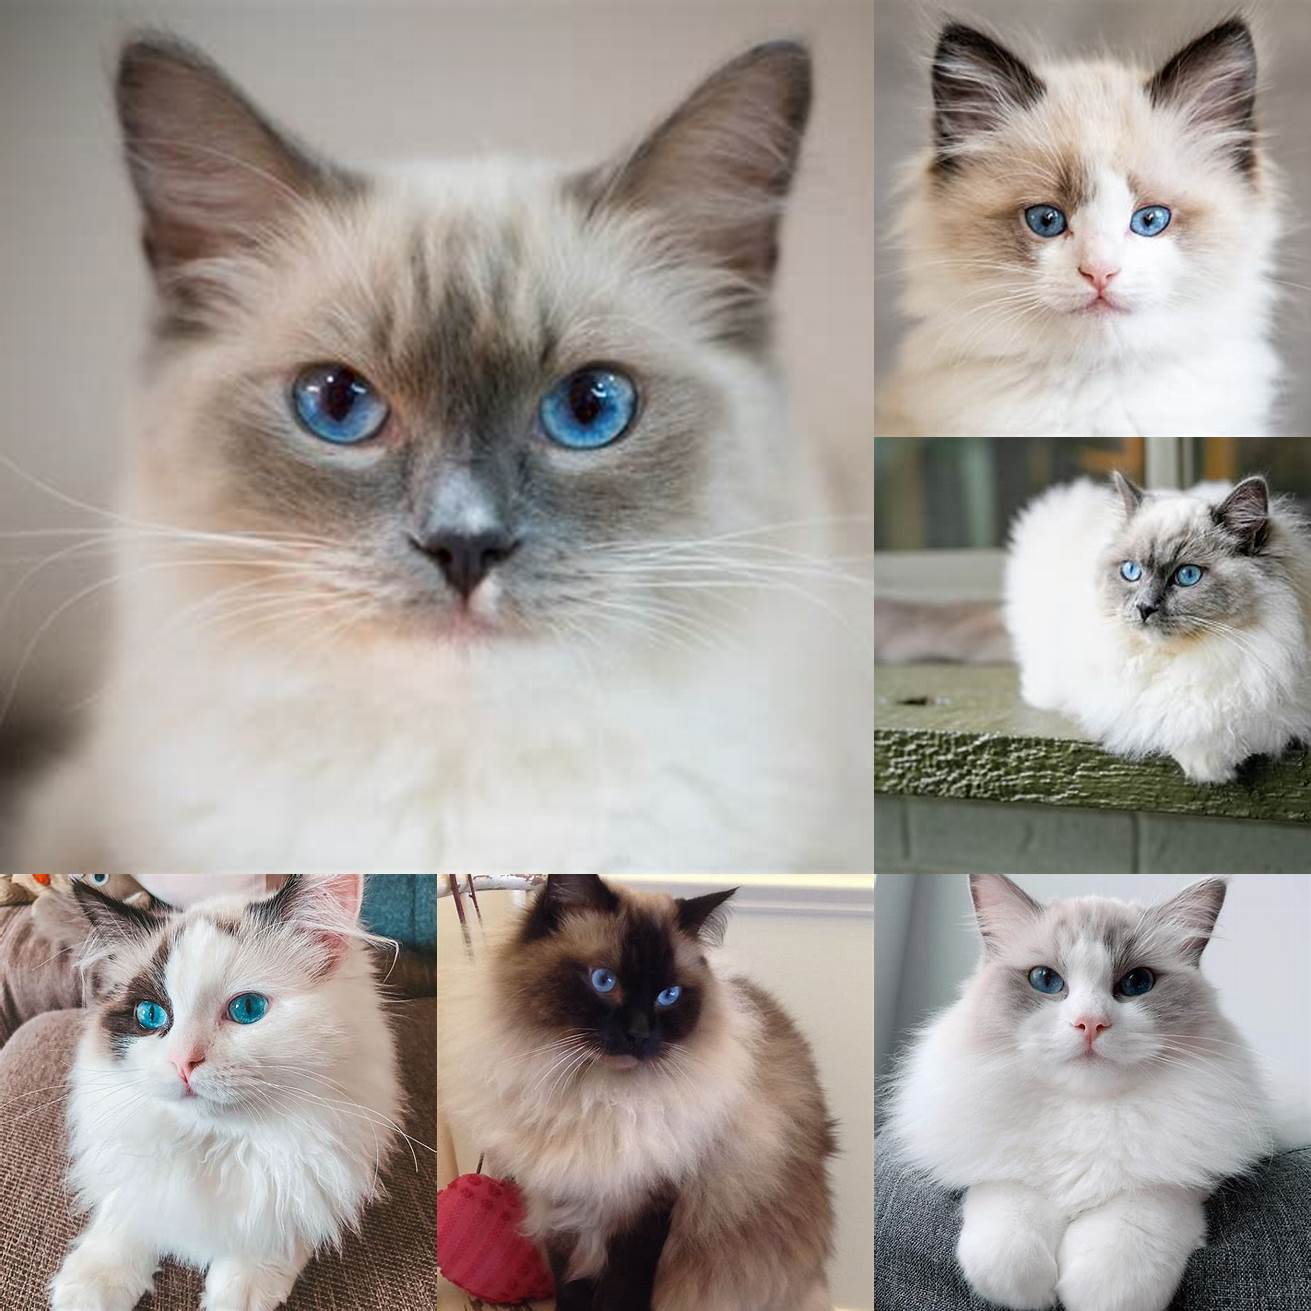 Ragdoll cats are known for their relaxed and easy-going personalities